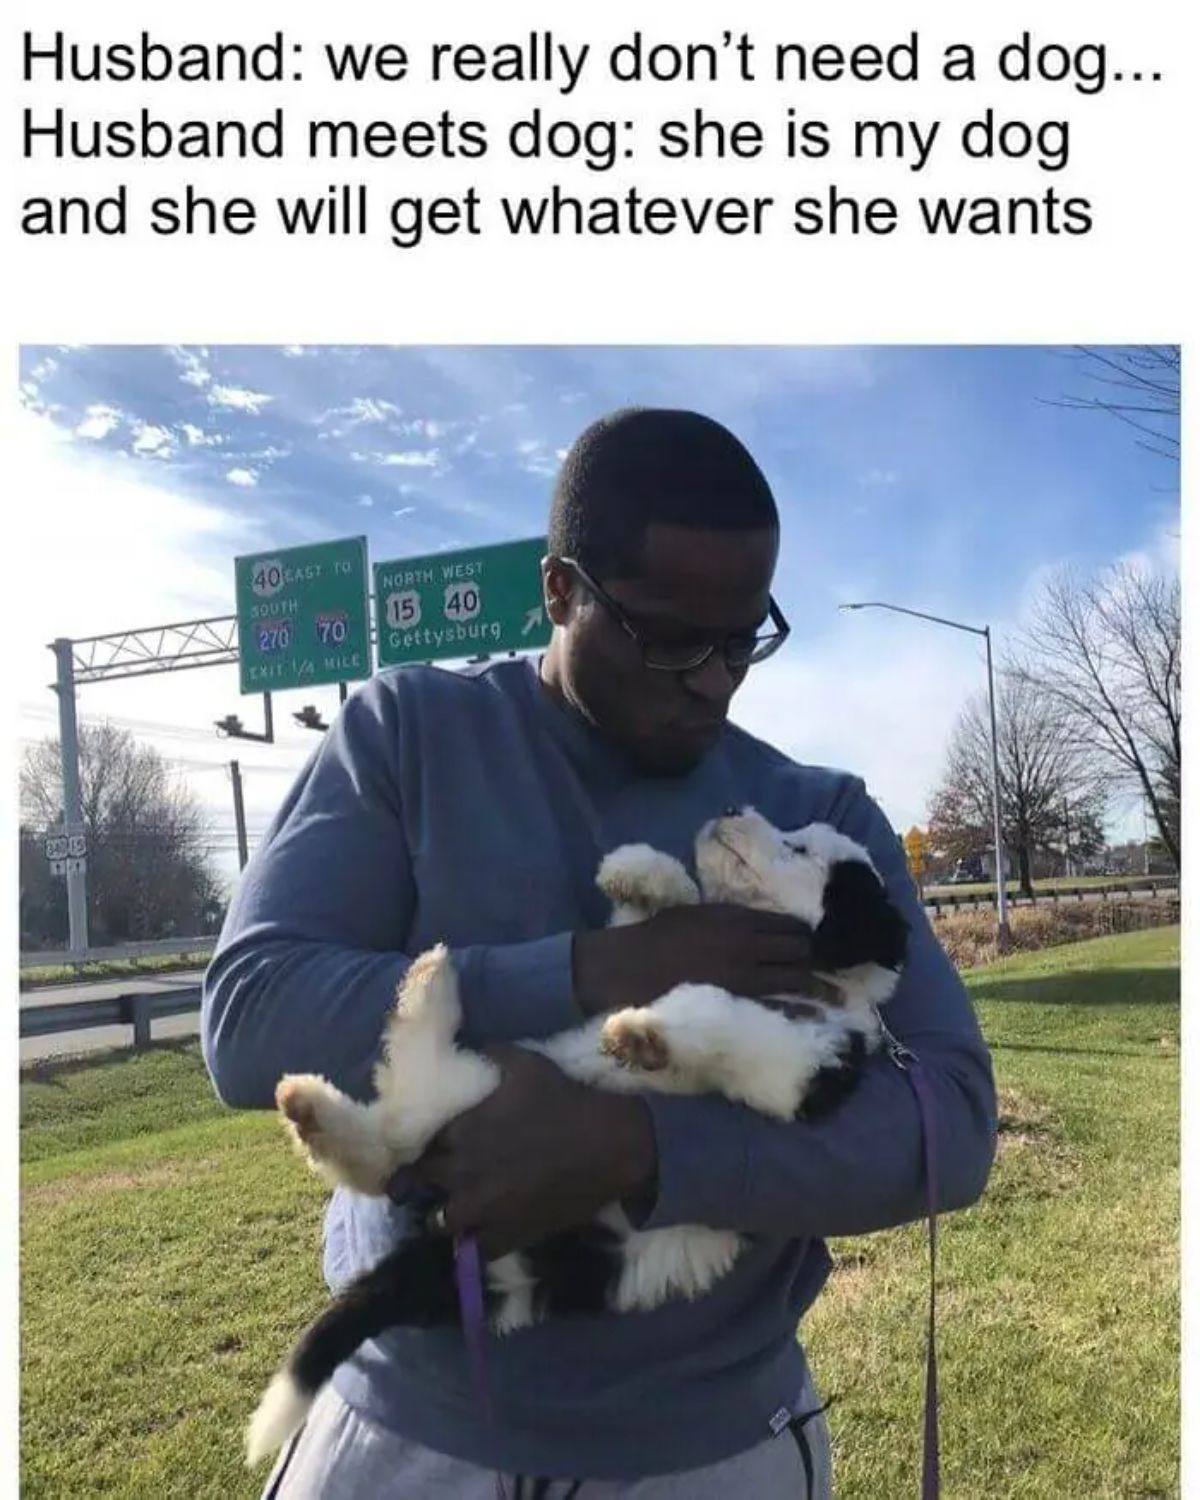 man holding a black and white dog like a baby with caption saying the husband didn't want the dog but now loves the dog